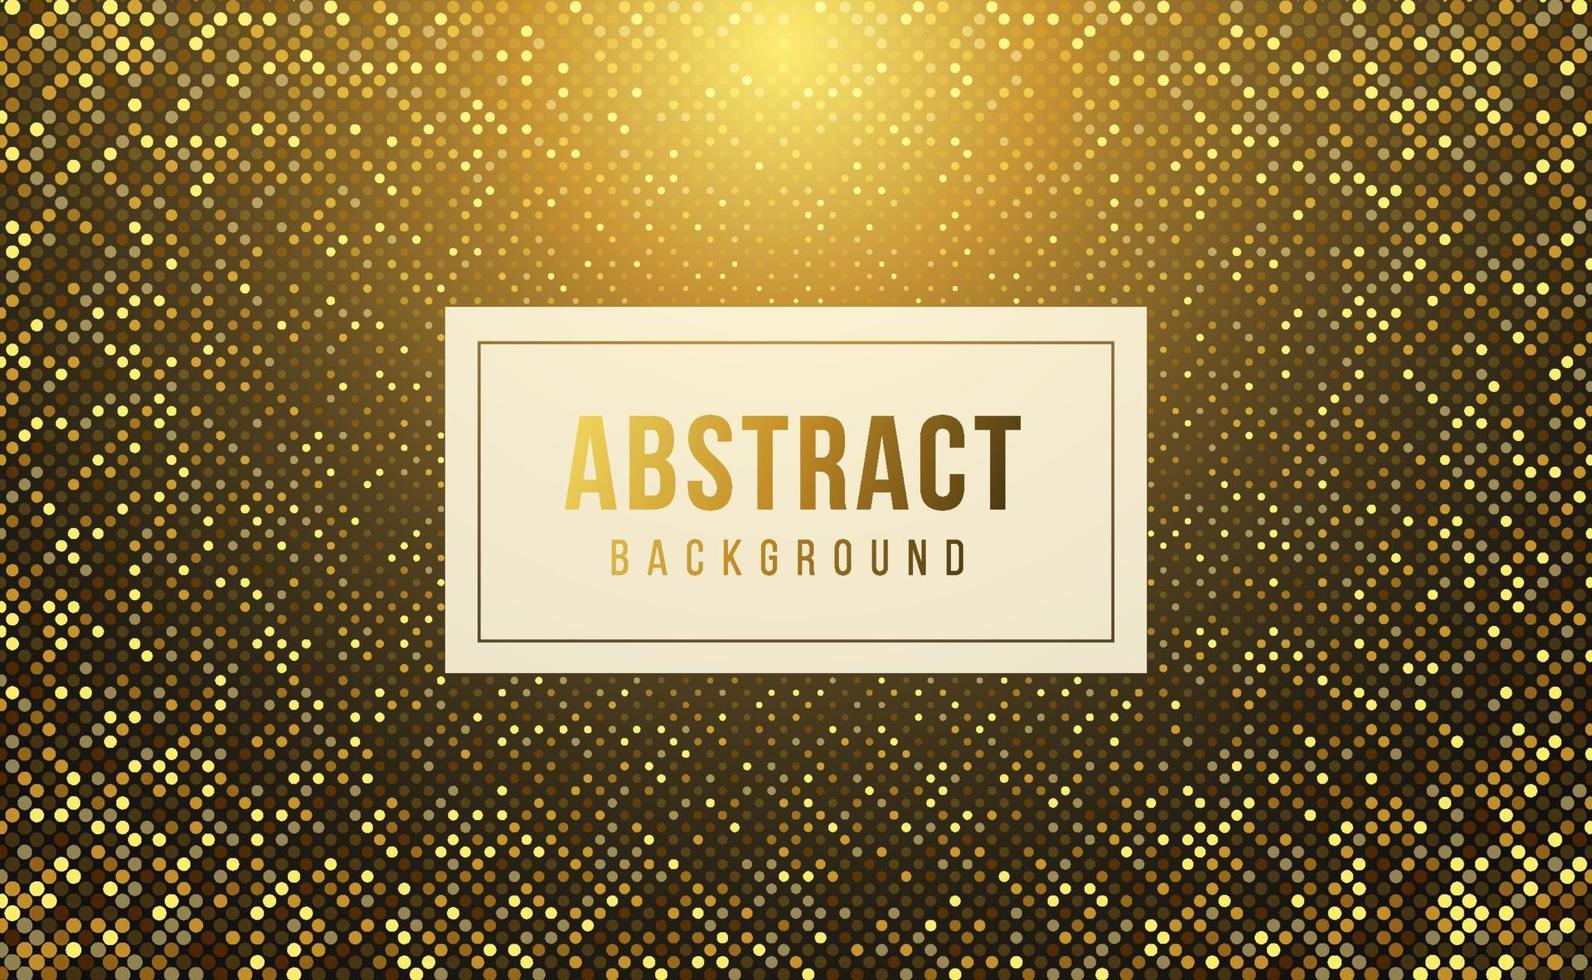 Abstract geometric pattern gold background, digital technology banner, particle drapery luxury gold background, gold glowing neon, luxury style, golden luminous dust, texture illustration vector